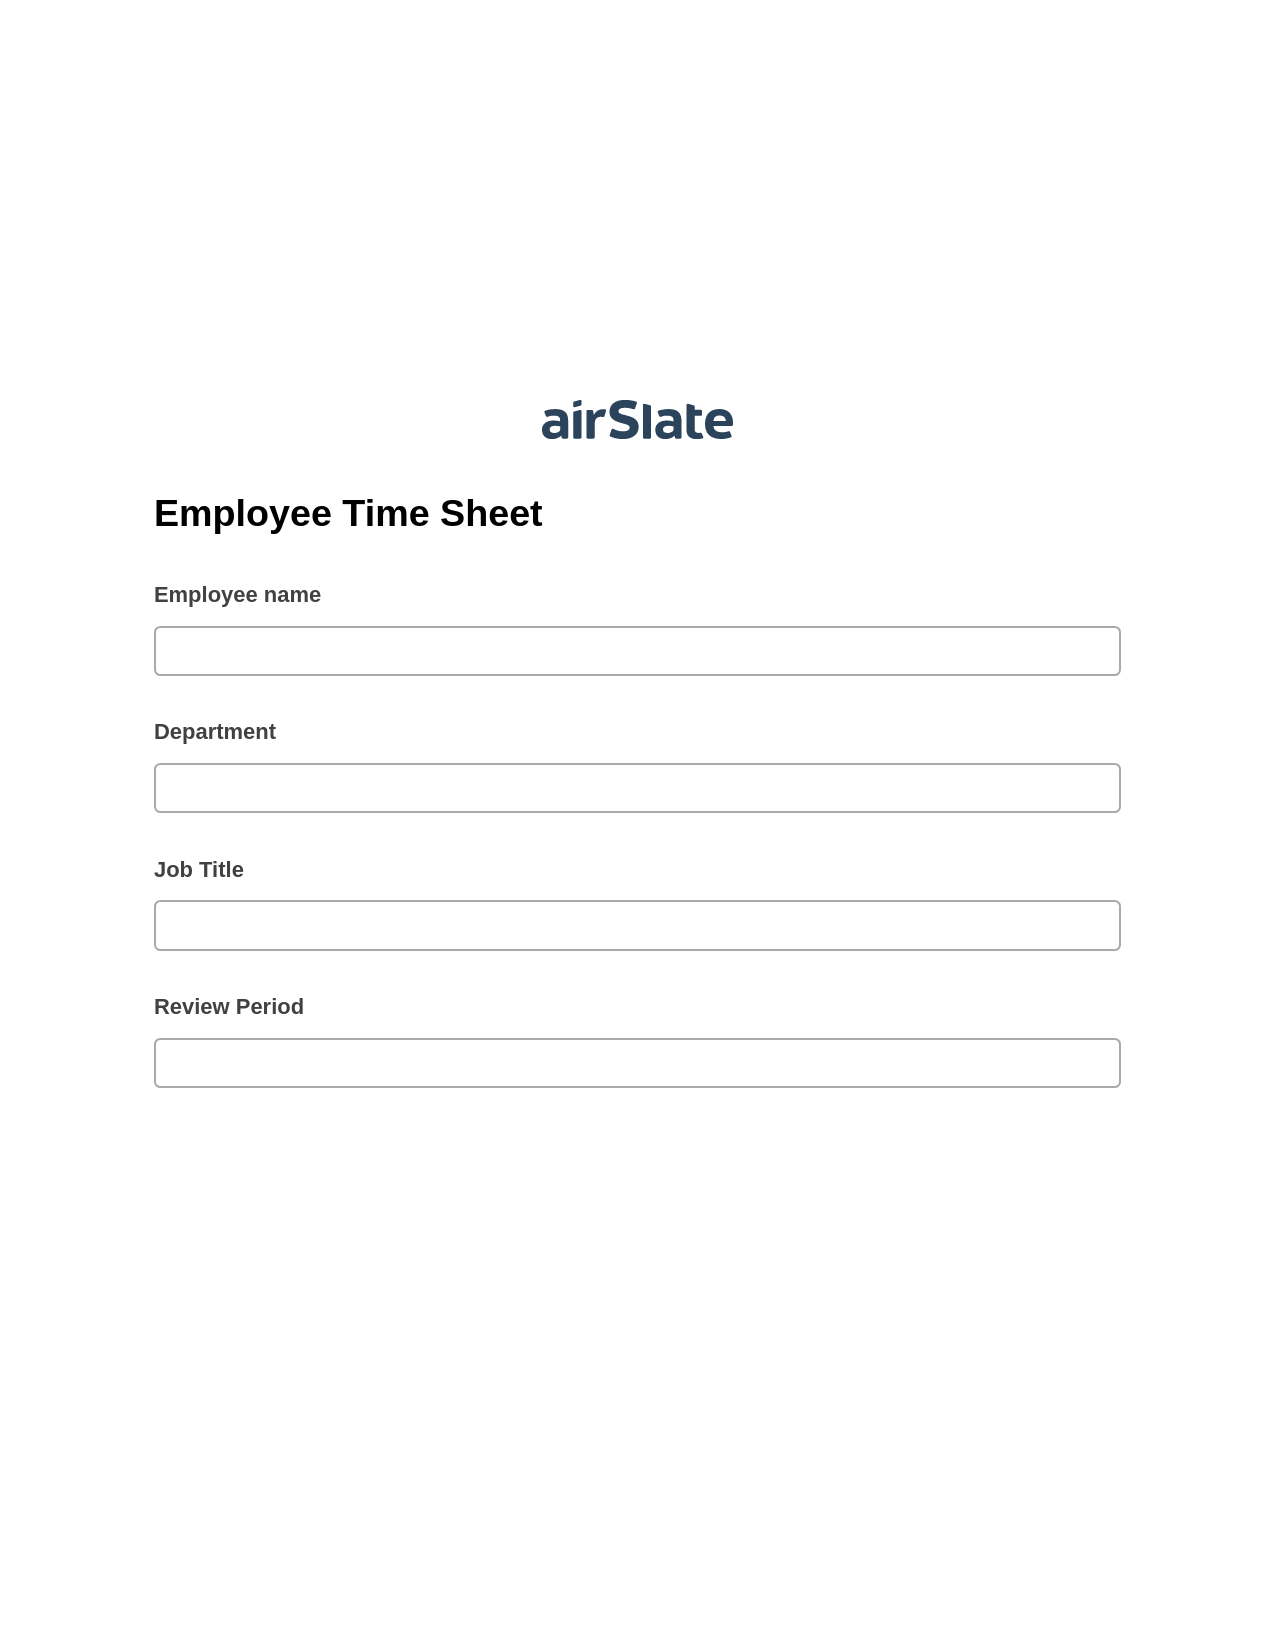 Employee Time Sheet Pre-fill from CSV File Bot, Open under a Role Bot, Archive to Google Drive Bot